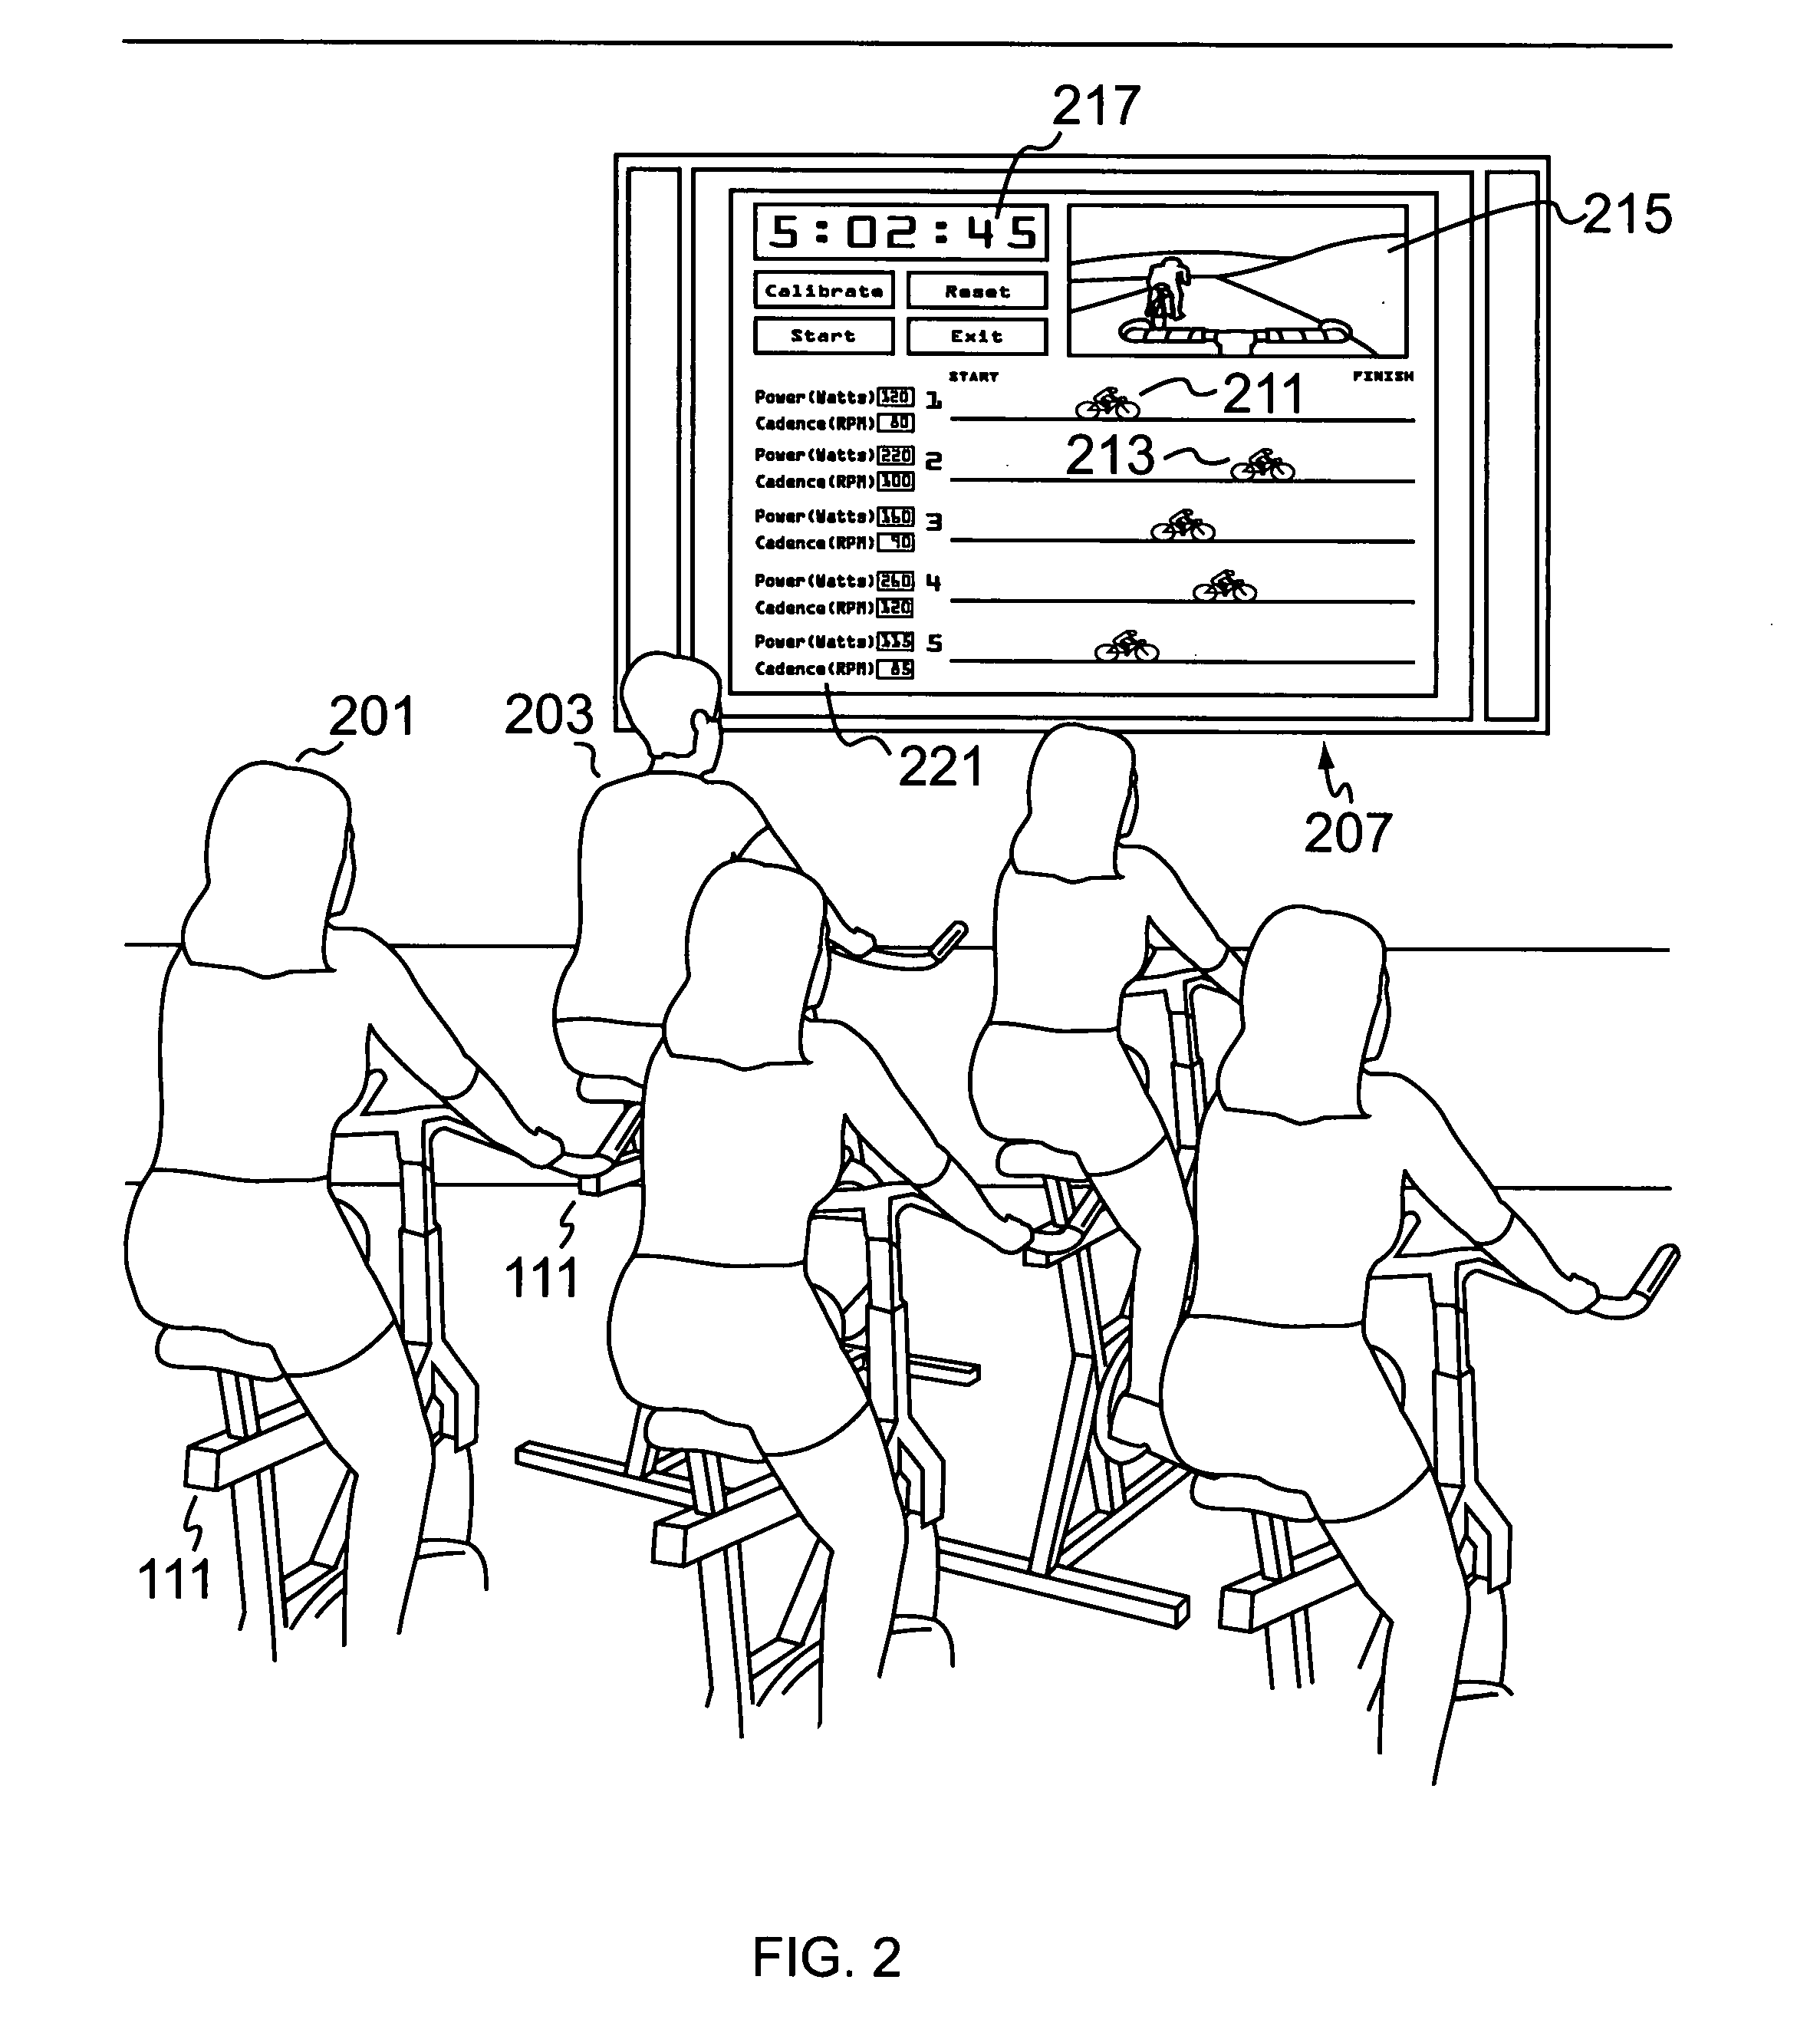 Apparatus for measuring exercise performance